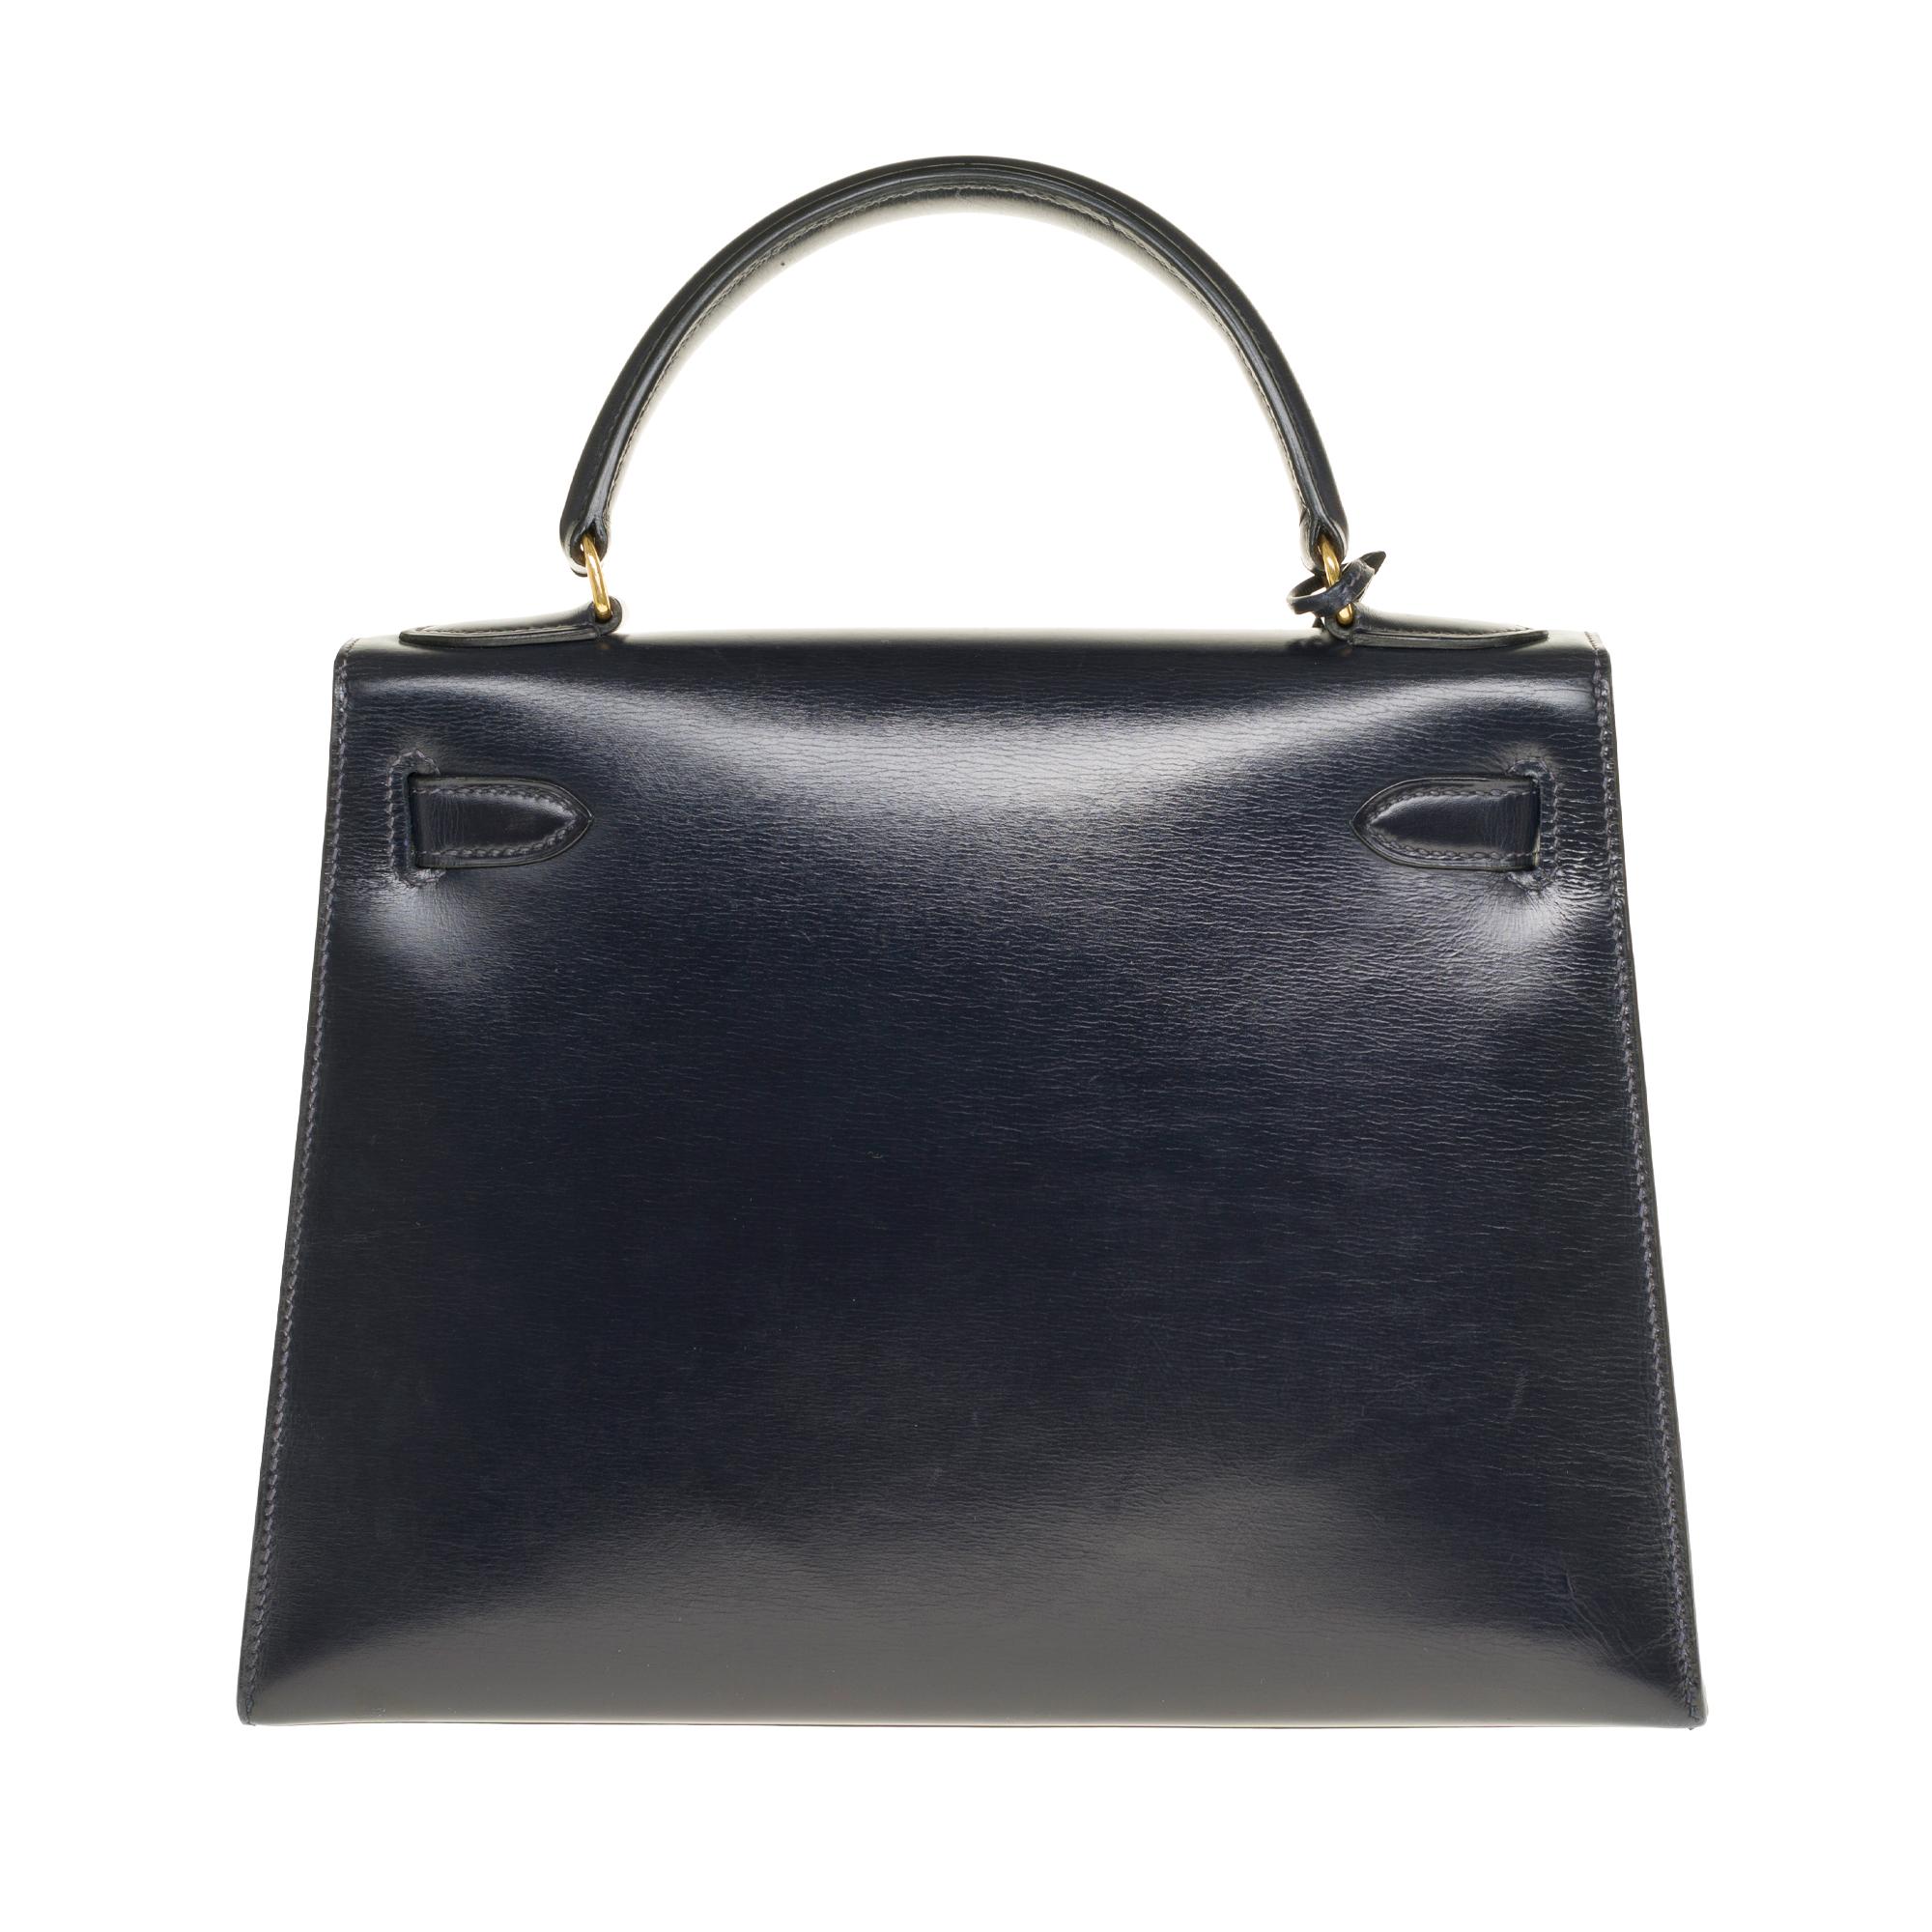 Splendid Hermes Kelly 30 handbag in navy calfskin leather, gold plated metal trim, simple handle in navy calf leather, shoulder strap handle (not signed) in navy calf allowing a hand or shoulder strap.

Closure by flap.
Lining in navy leather, a